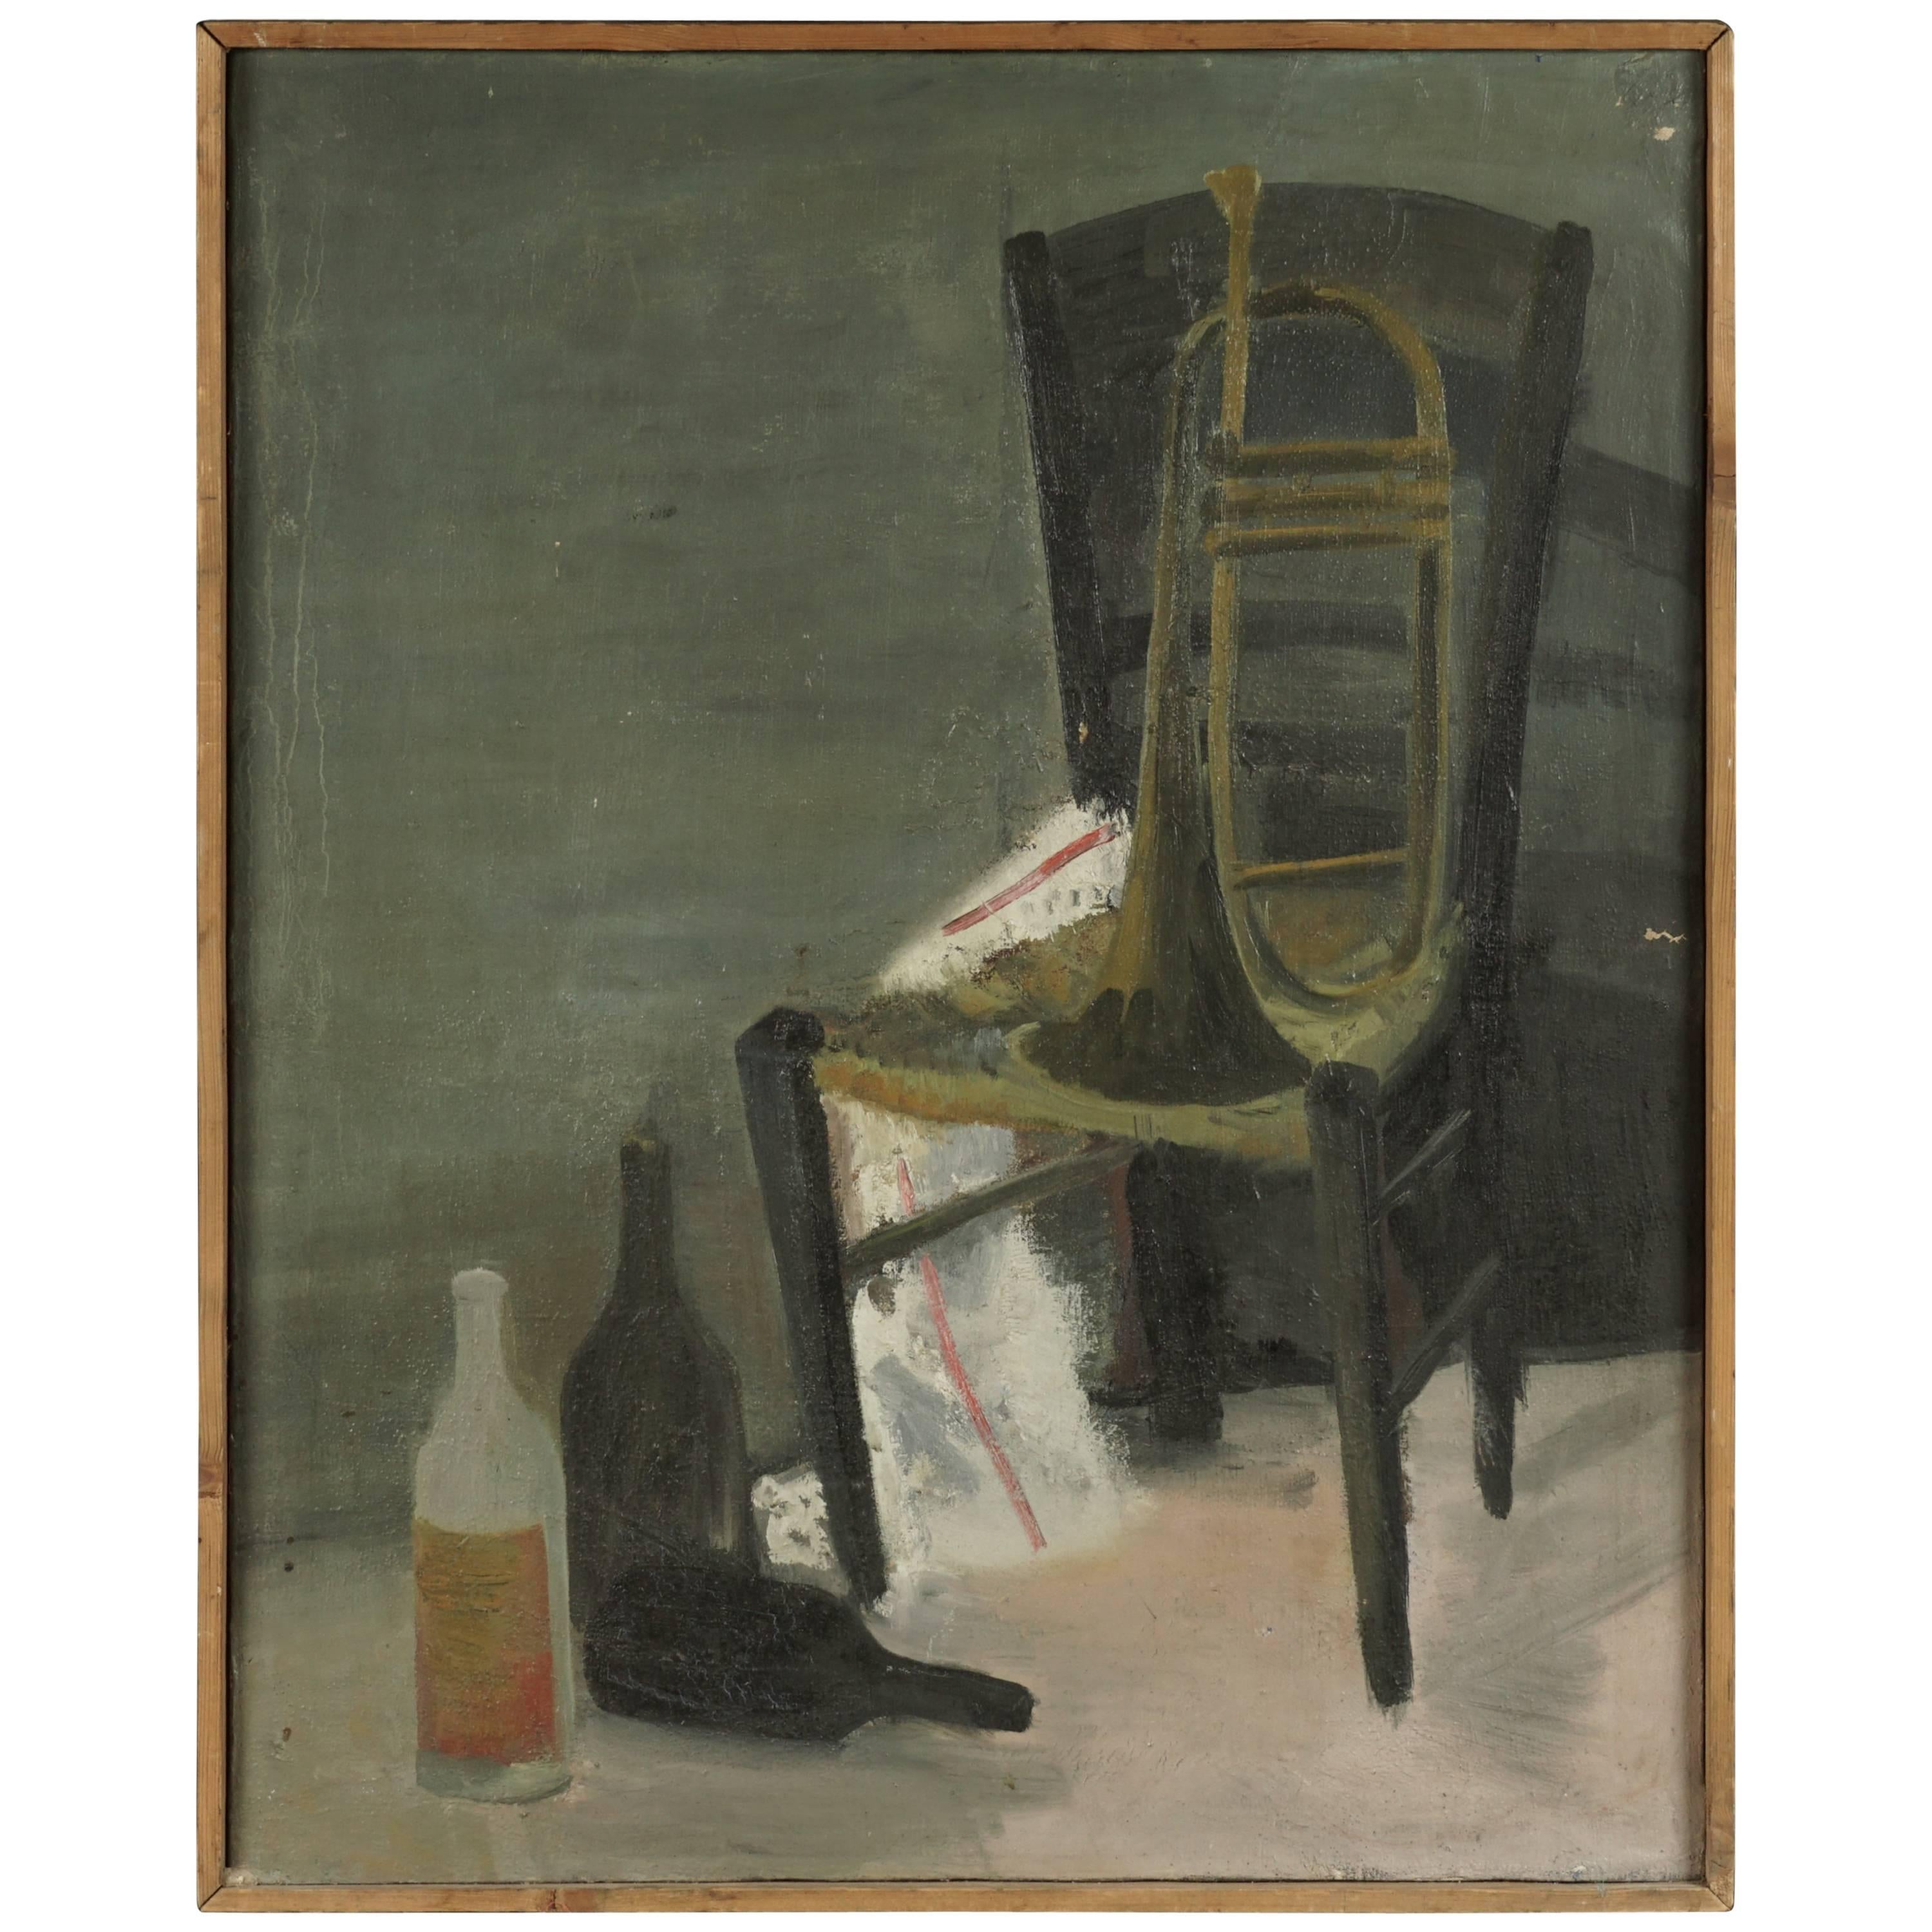 Early Still Life from France, circa 1900